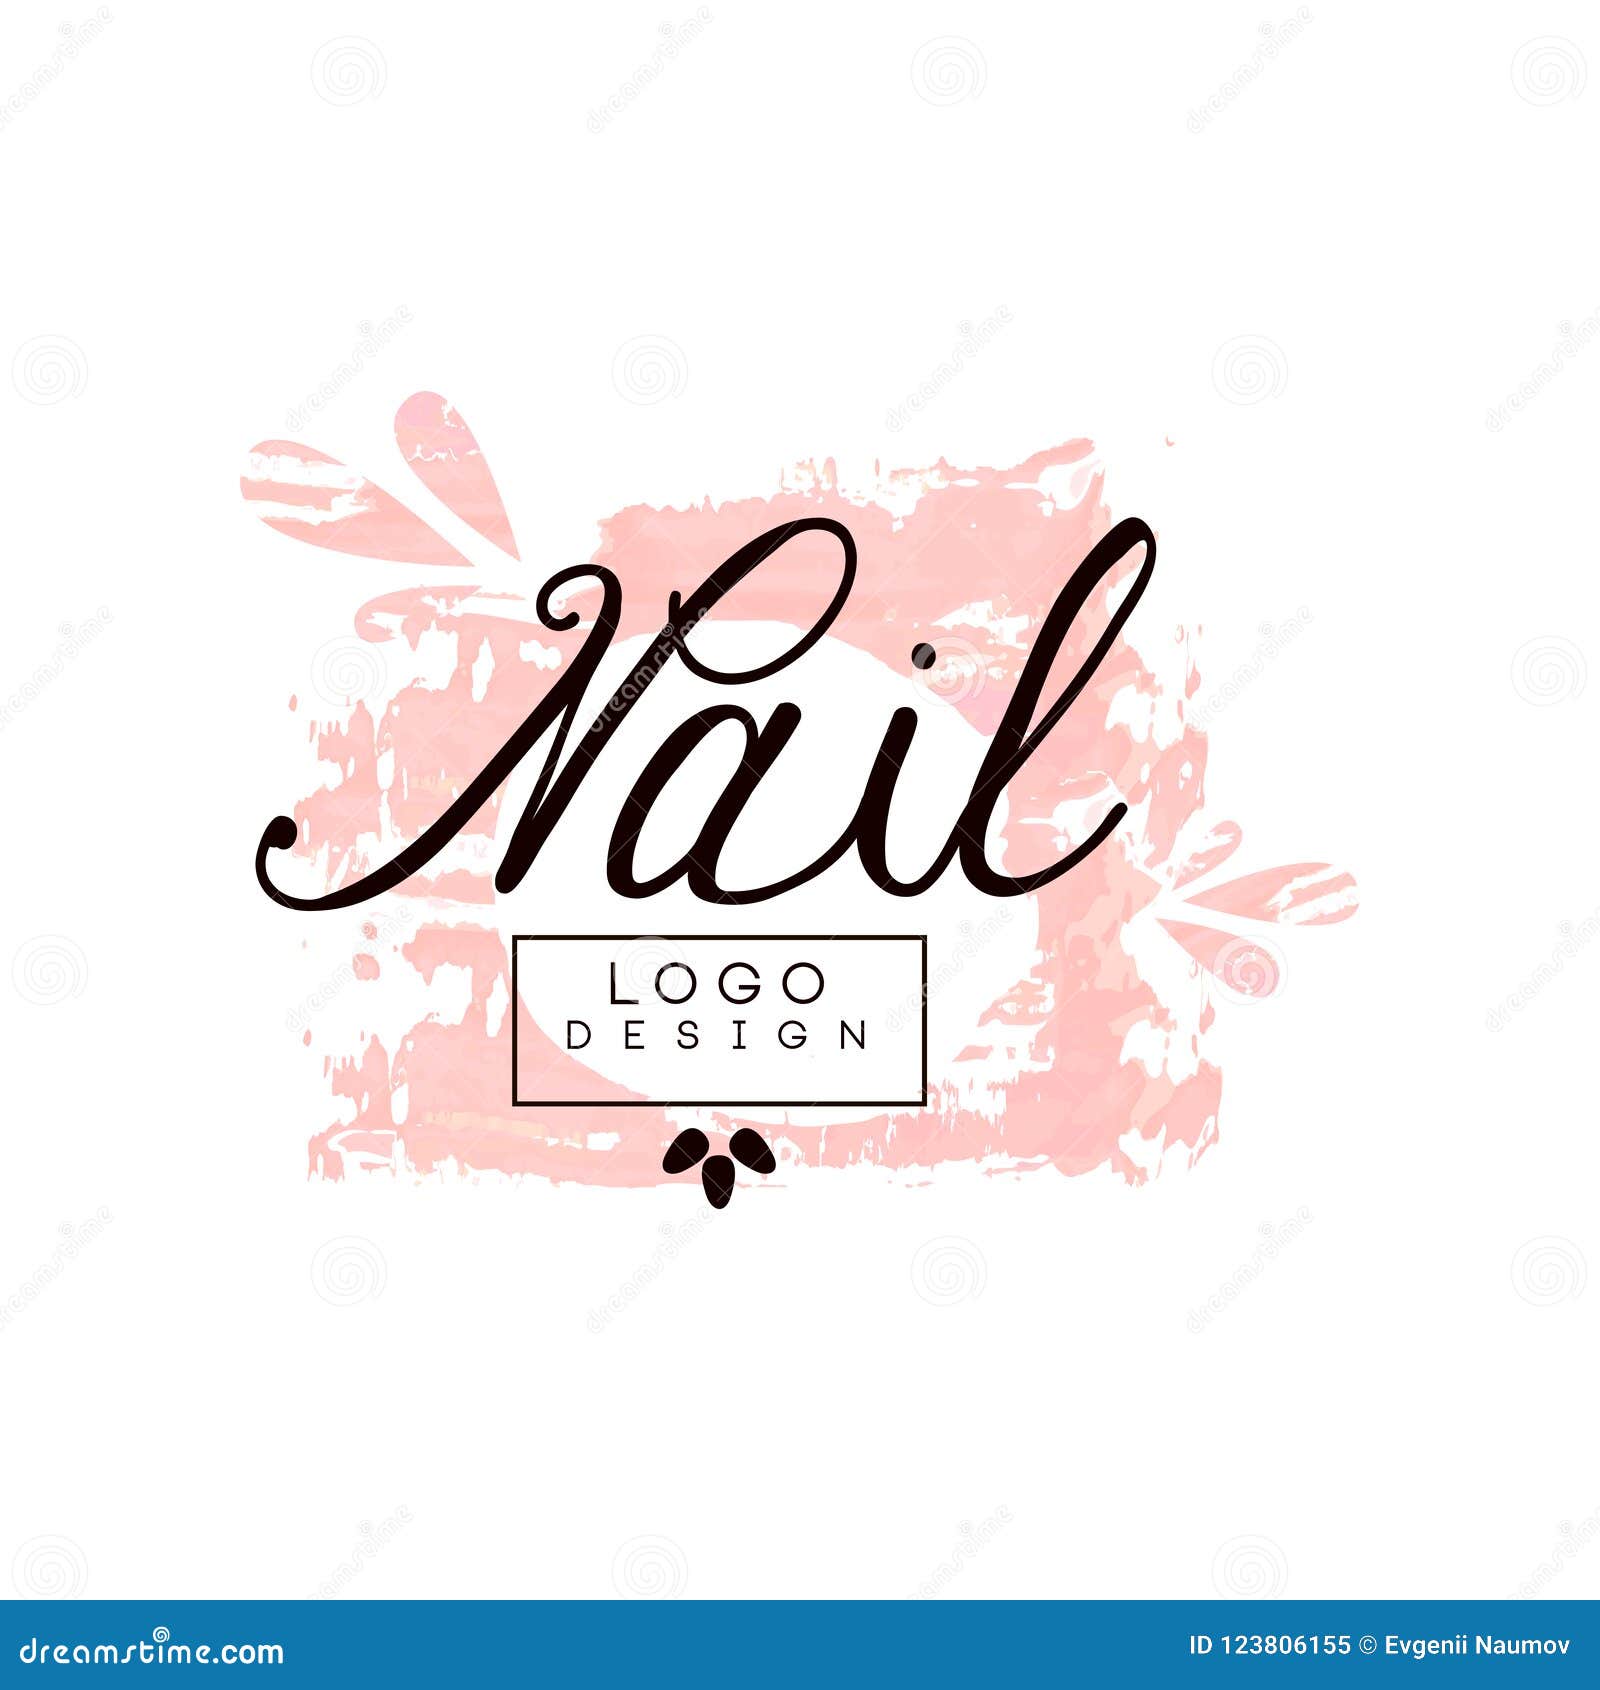 Initial Letter Z Nails Logo Vector Stock Vector (Royalty Free) 2005030190 |  Shutterstock